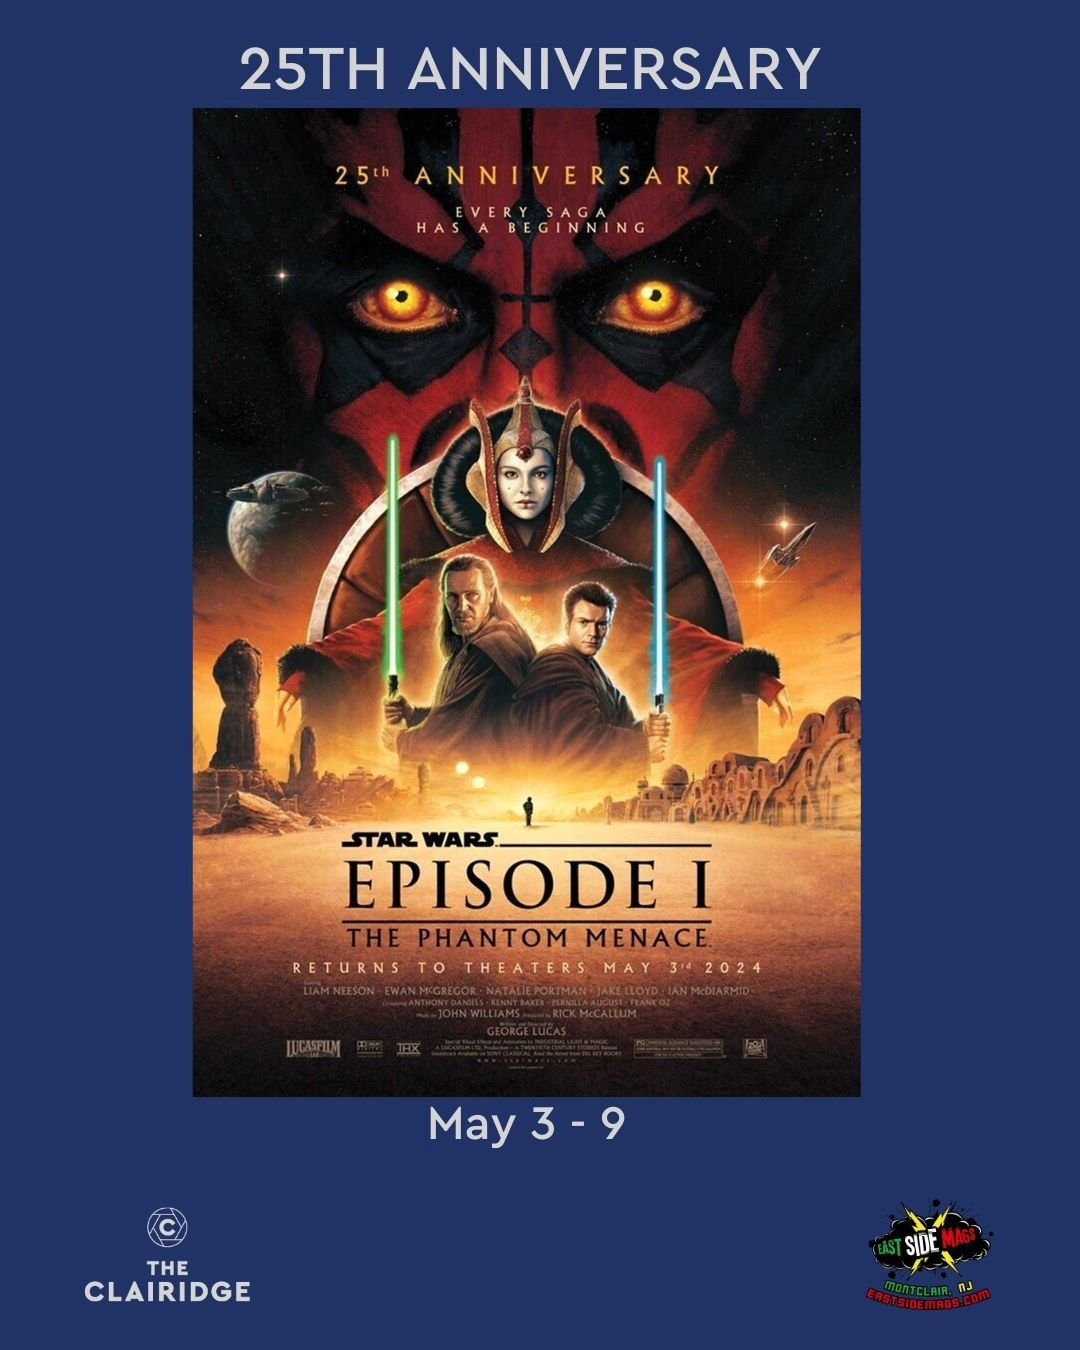 The force is strong at The Clairidge!

STAR WARS: EPISODE I &ndash; THE PHANTOM MENACE: 25TH ANNIVERSARY
May 3 - 9

After the feature, fans will also get a special first look at  STAR WARS: THE ACOLYTE series coming to Disney+ June 2024.

Presented i